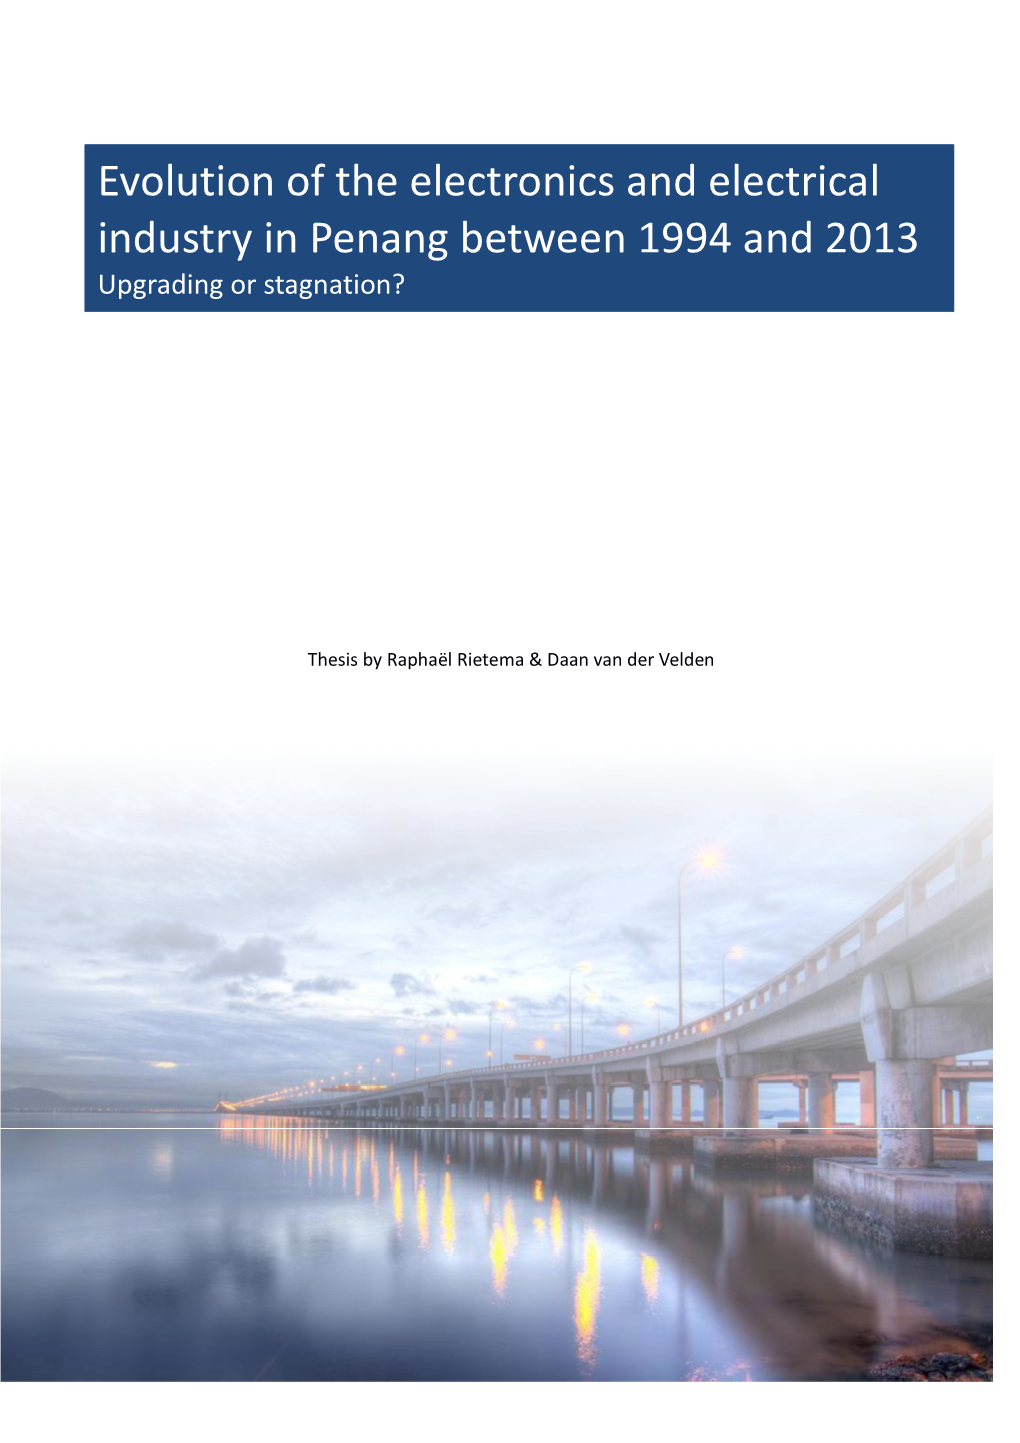 Evolution of the Electronics and Electrical Industry in Penang Between 1994 and 2013